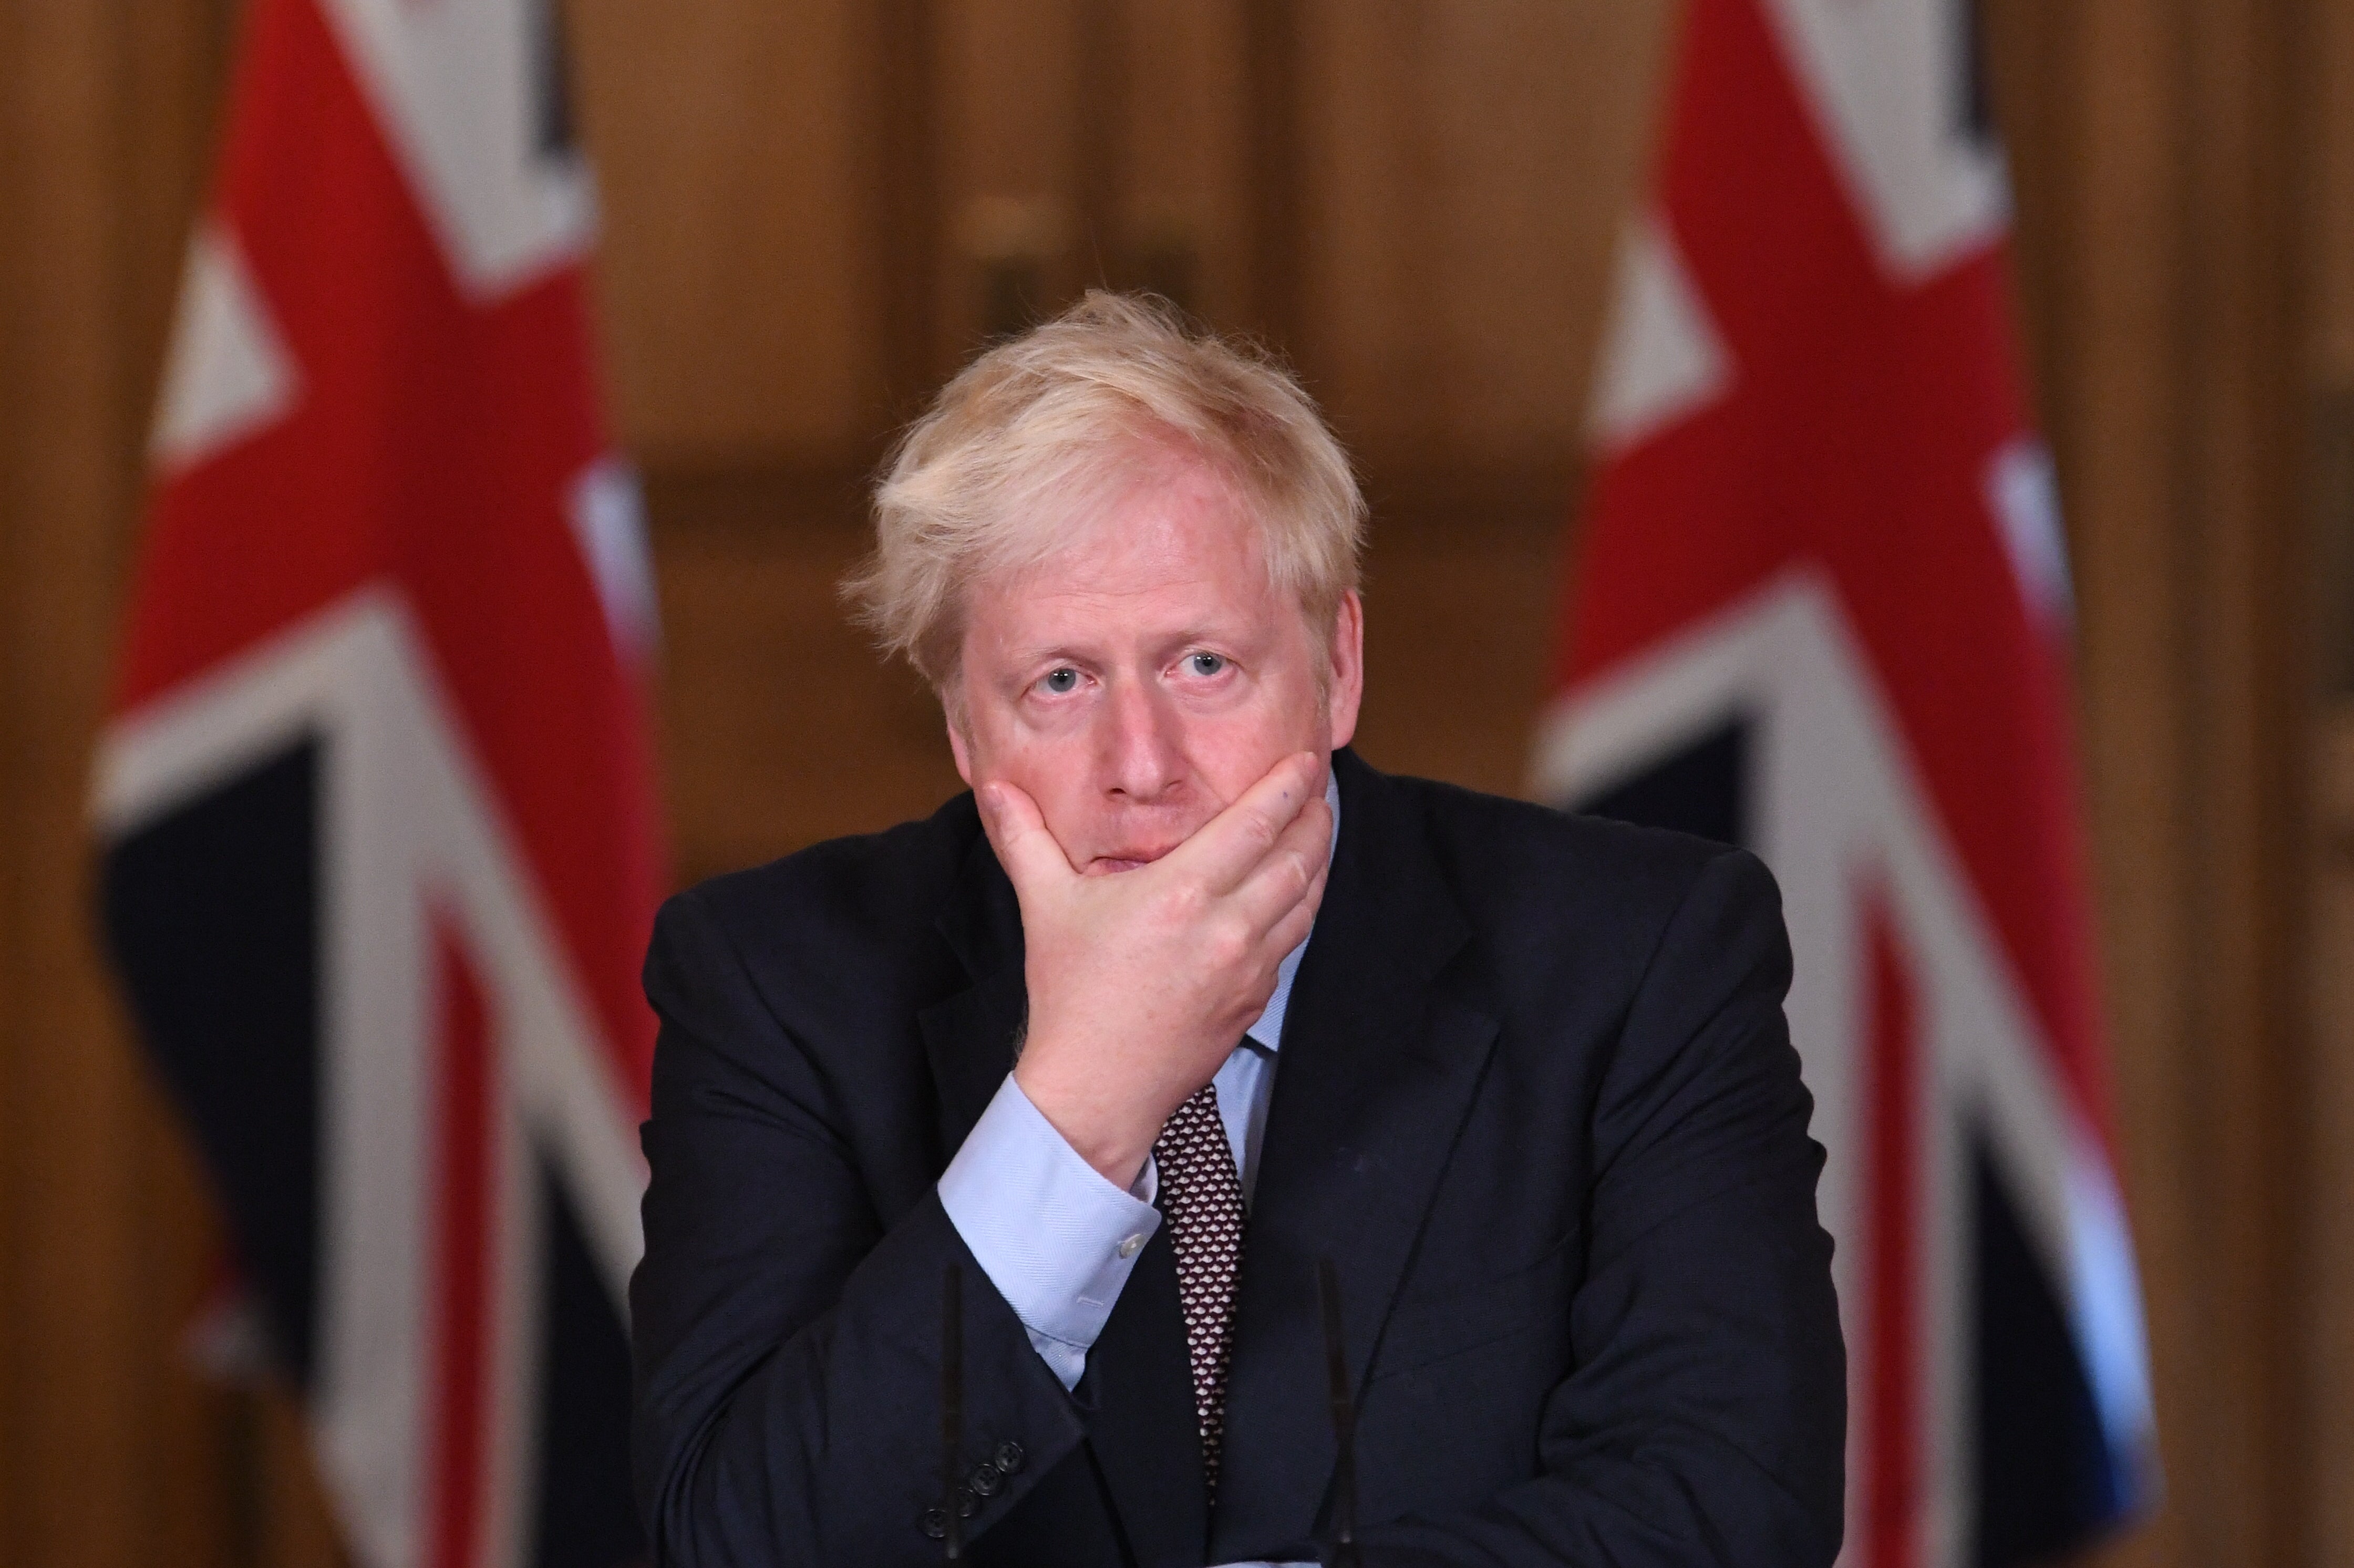 Boris Johnson and his government have been condemned for their handling of the Covid-19 pandemic